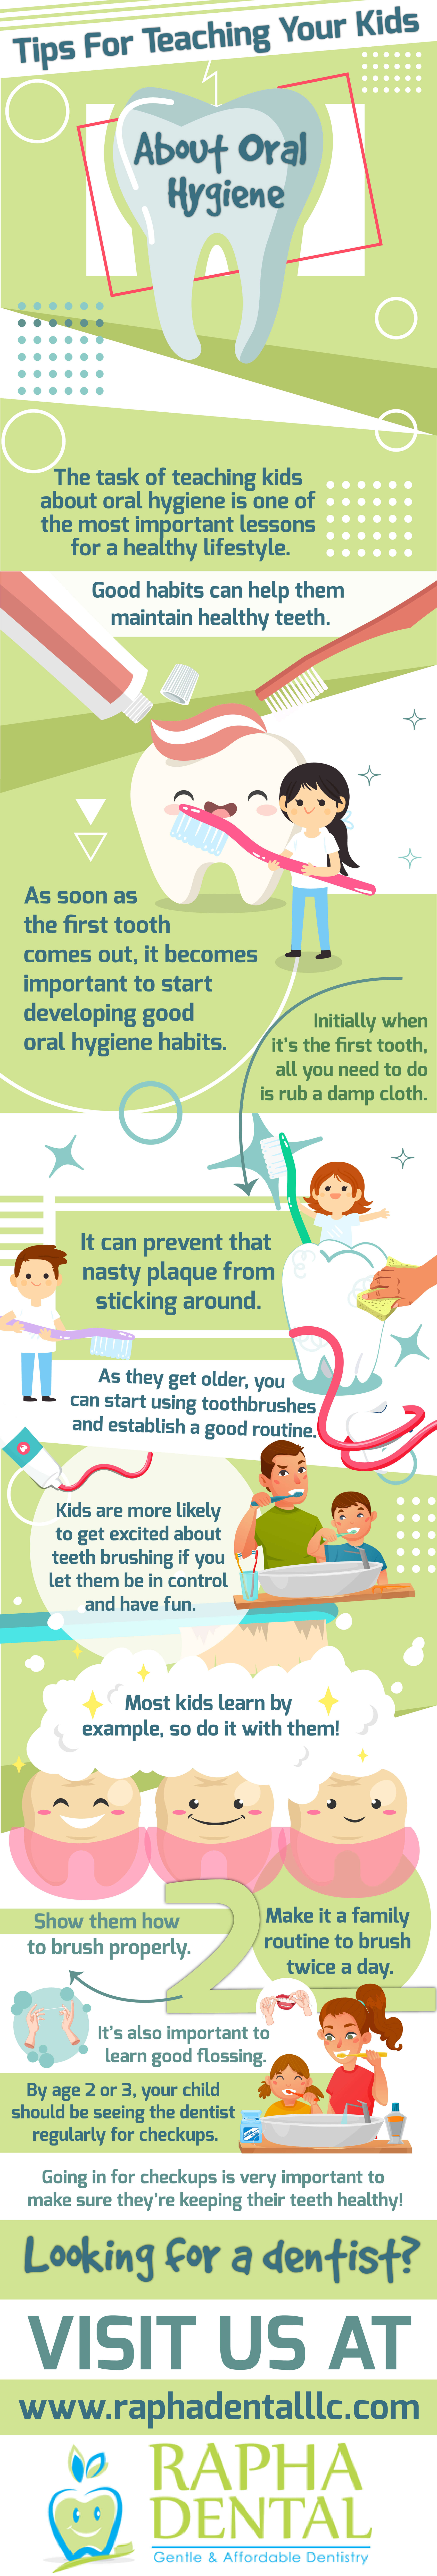 Tips For Teaching Your Kids About Oral Hygiene